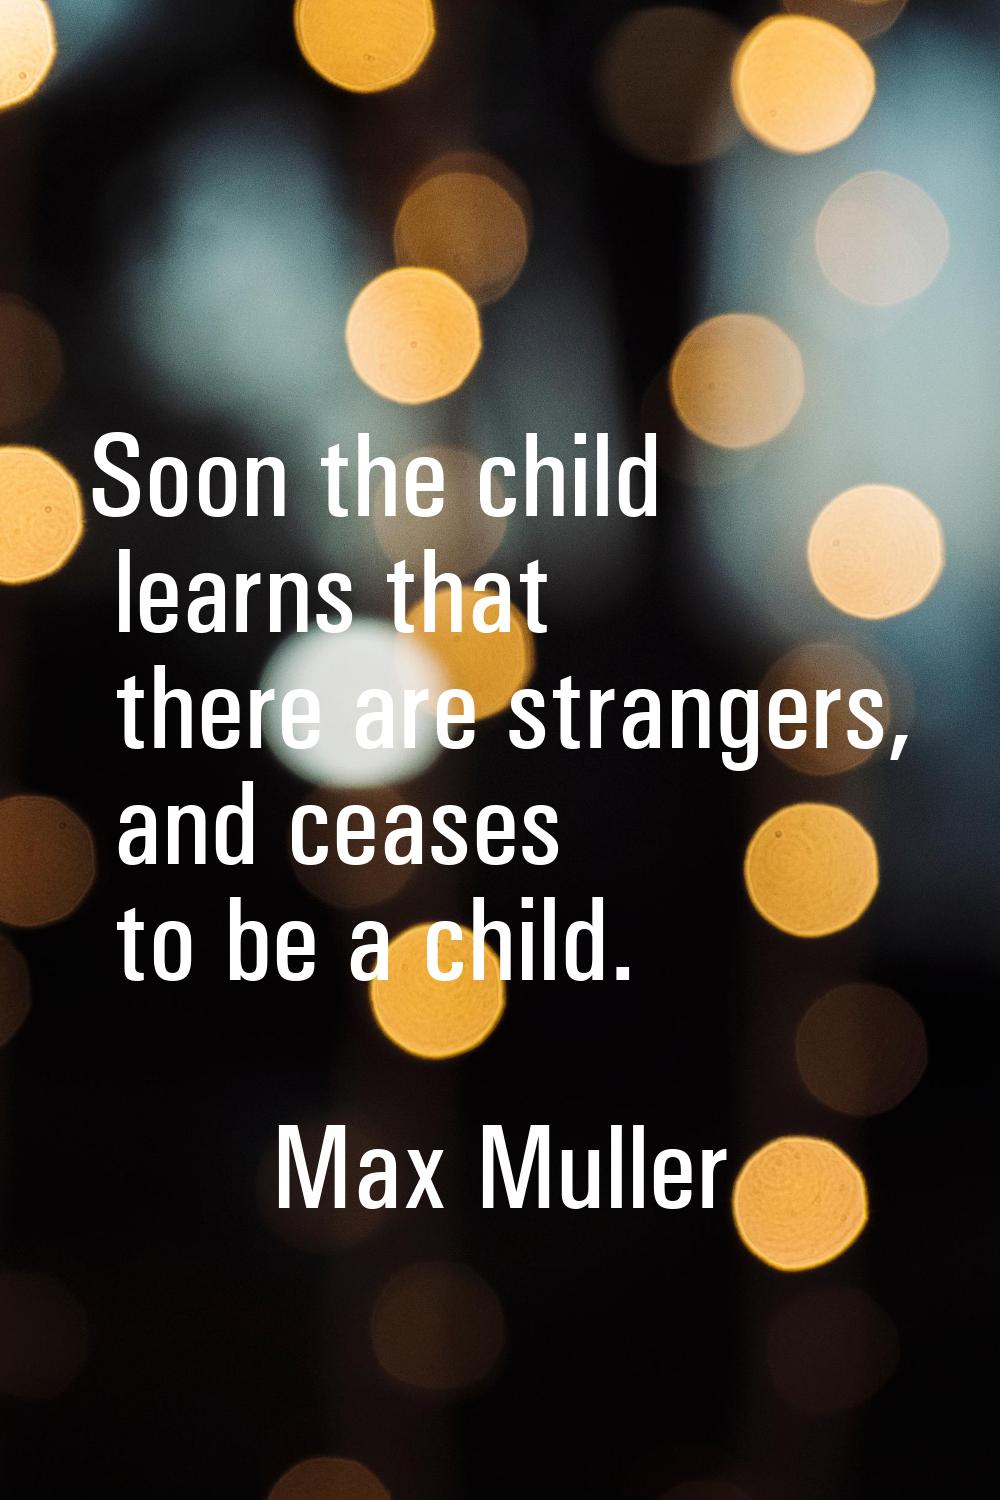 Soon the child learns that there are strangers, and ceases to be a child.